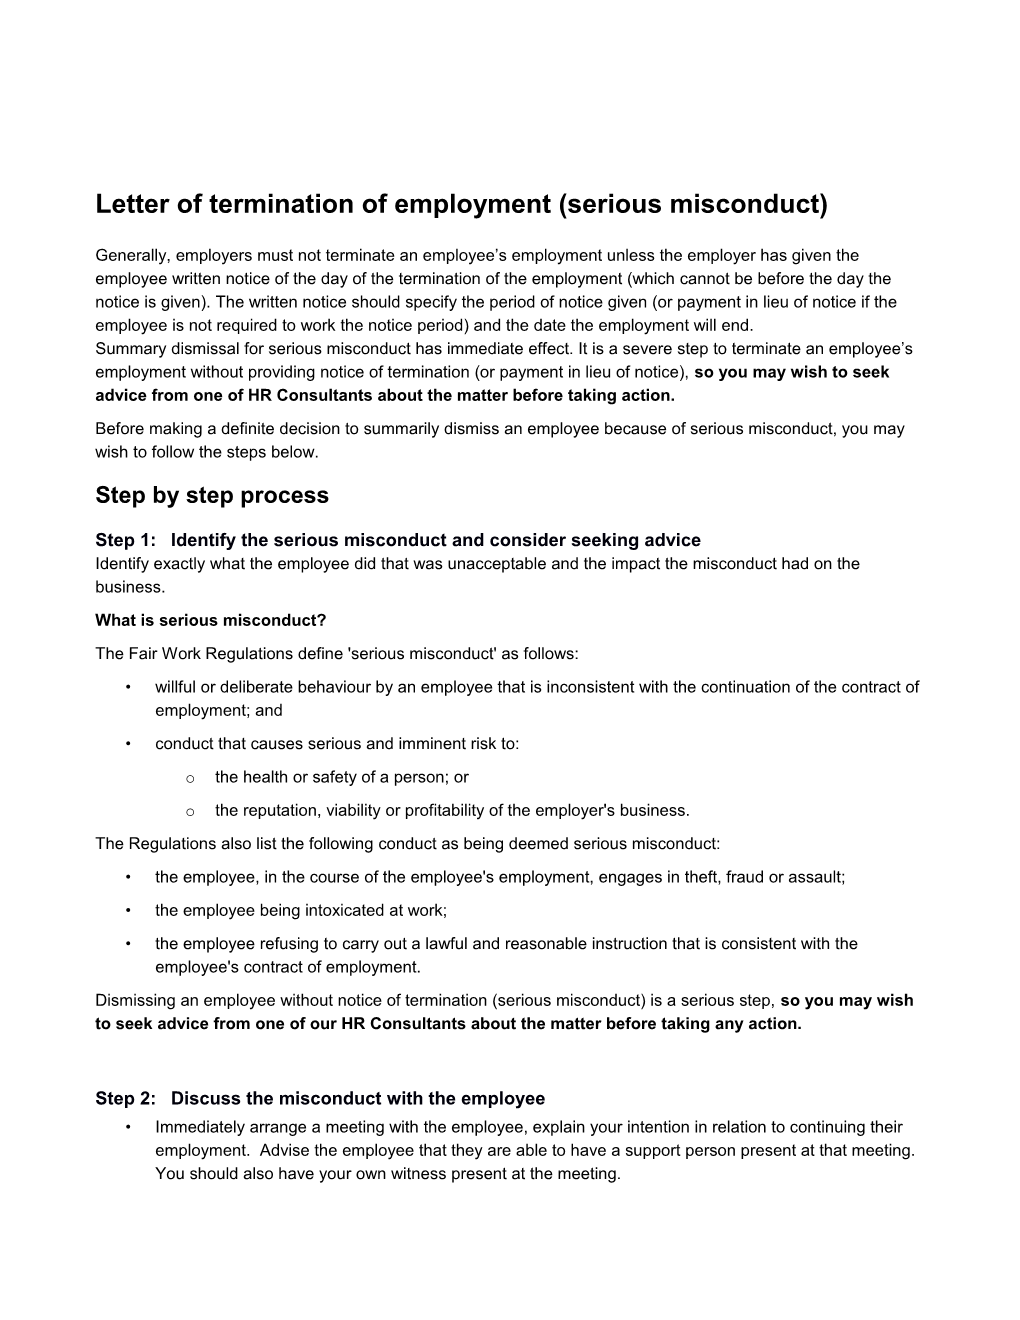 Letter of Termination of Employment (Summary Dismissal - Serious Misconduct) Template